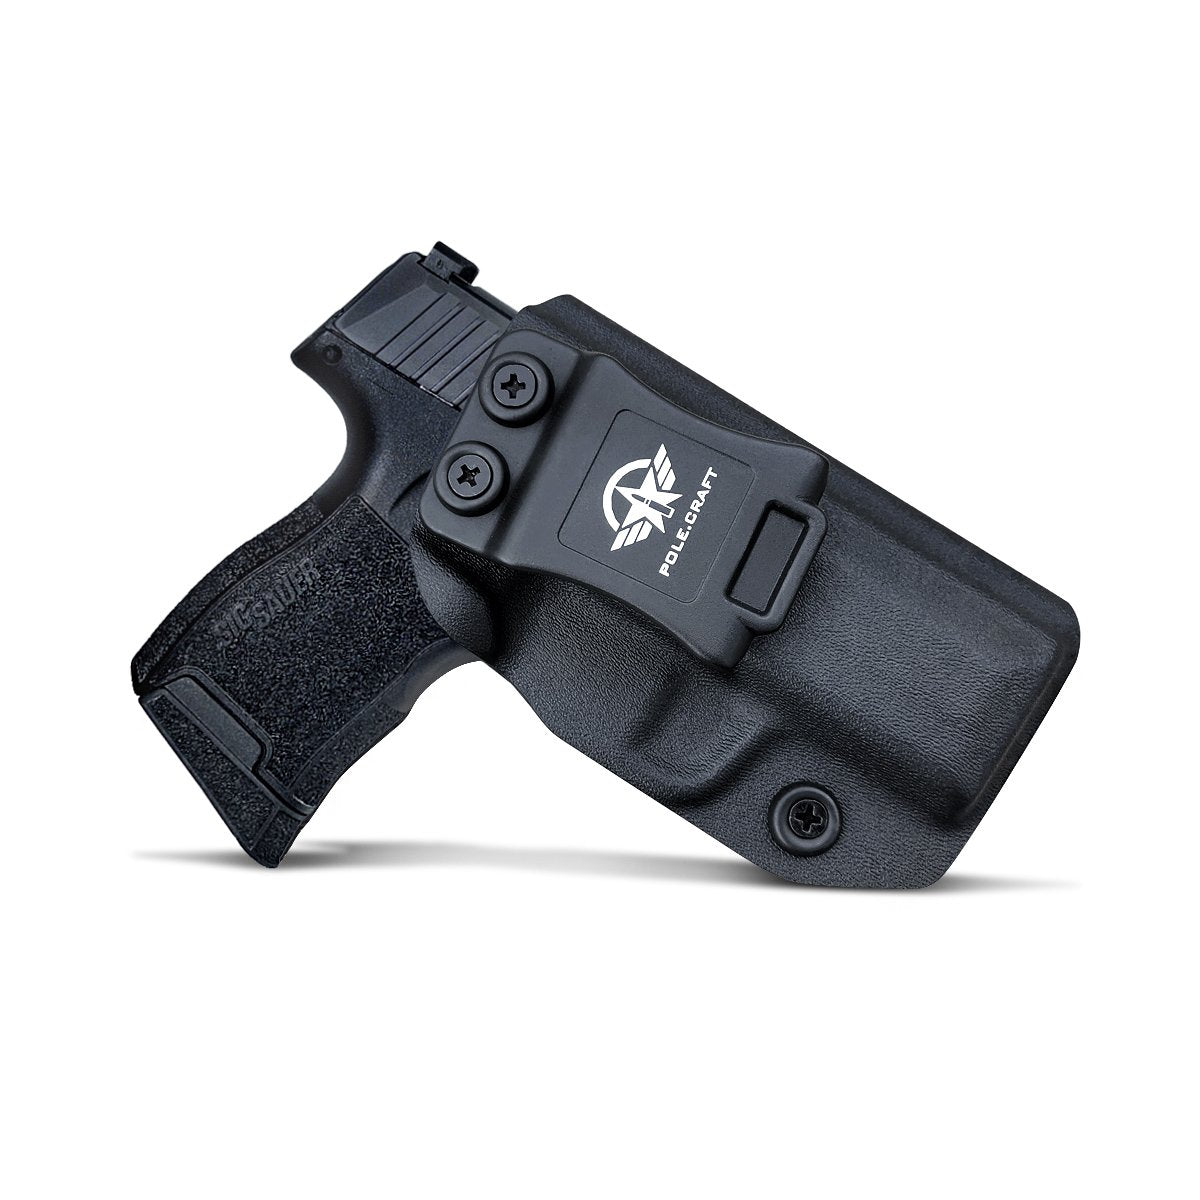 Sig P365 Holster IWB Kydex for Sig Sauer P365 Holsters Concealed Carry - Kydex  IWB Holster for Sig P365 SAS Accessories - IWB Concealed Holster Sig 365  Pistol Case Pocket (Black, Right /